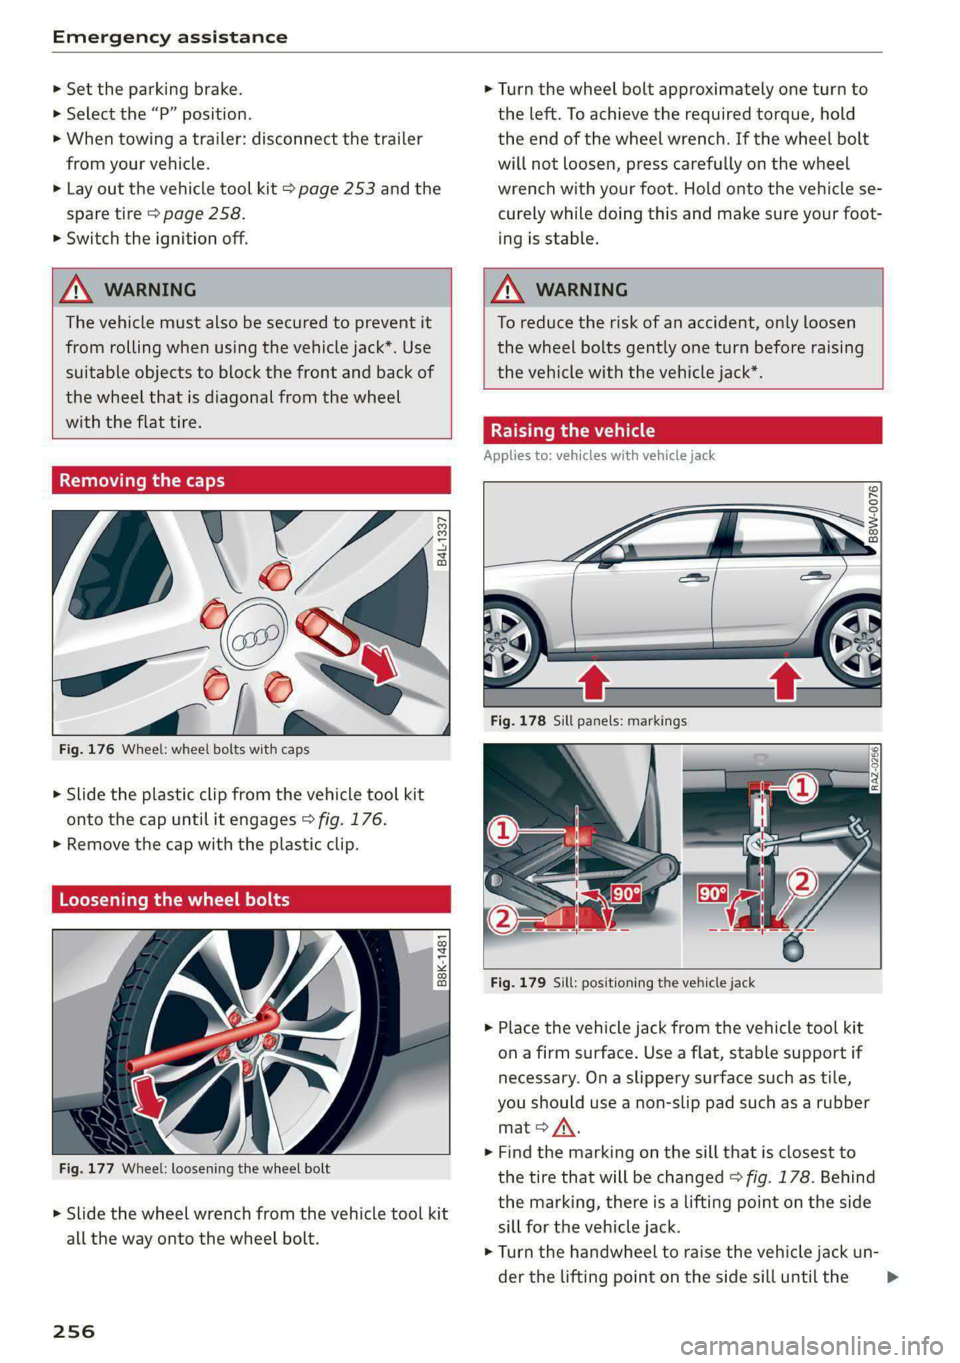 AUDI A4 2020  Owners Manual Emergency assistance 
  
> Set  the parking brake. 
> Select the “P” position. 
>» When towing a trailer: disconnect the trailer 
from your vehicle. 
> Lay out the vehicle tool kit > page 253 and